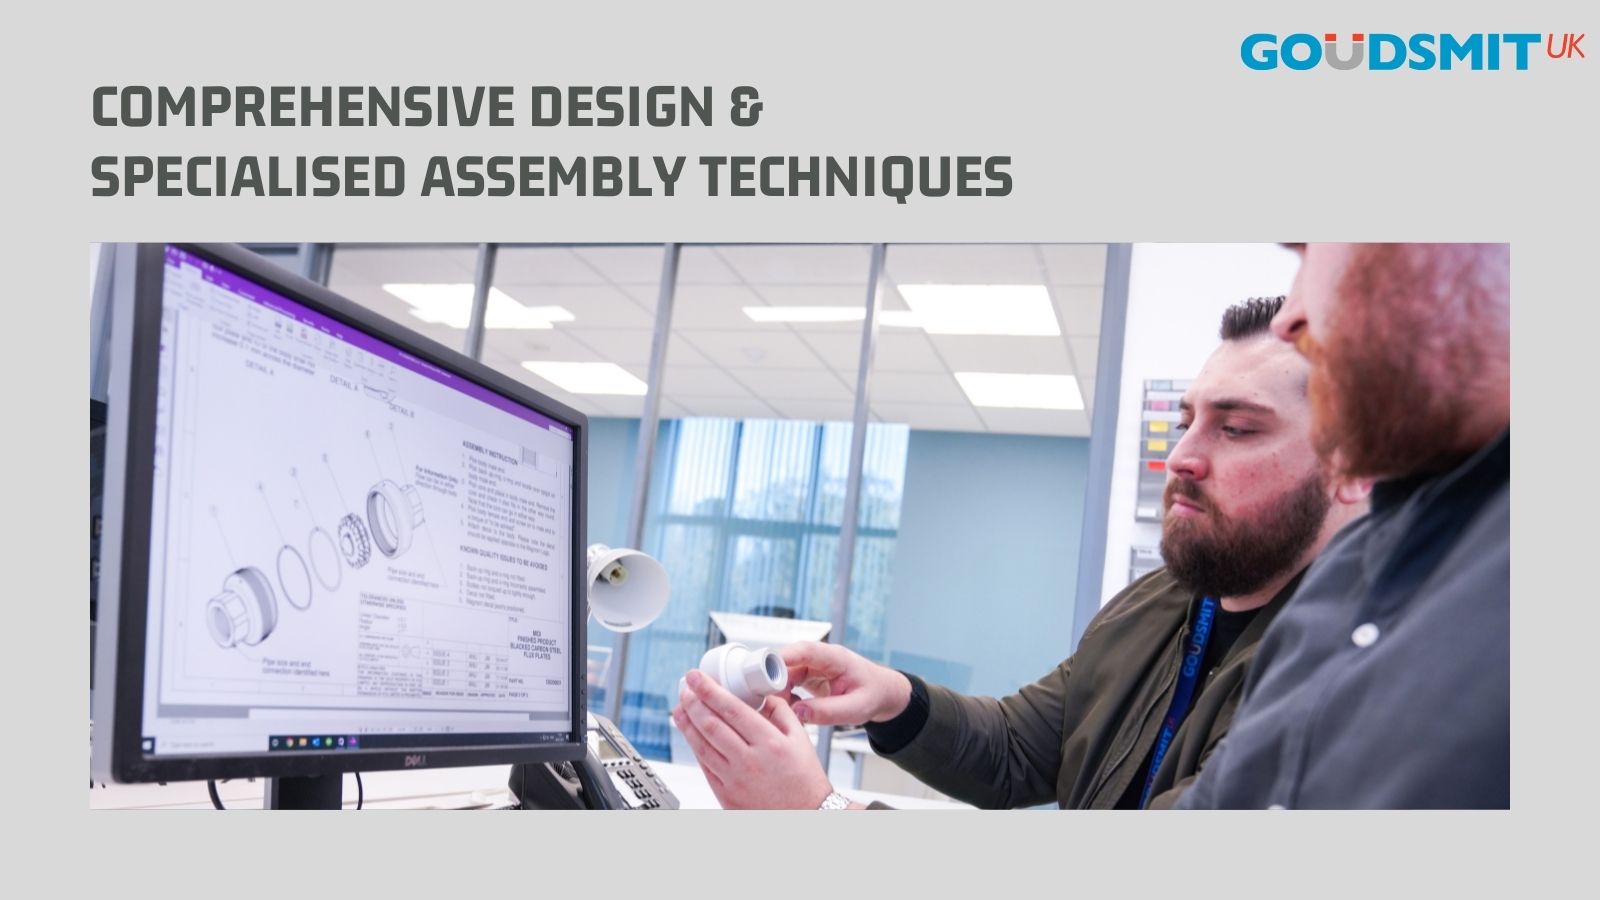 Comprehensive Design Services & Specialised Assembly Techniques from Goudsmit UK